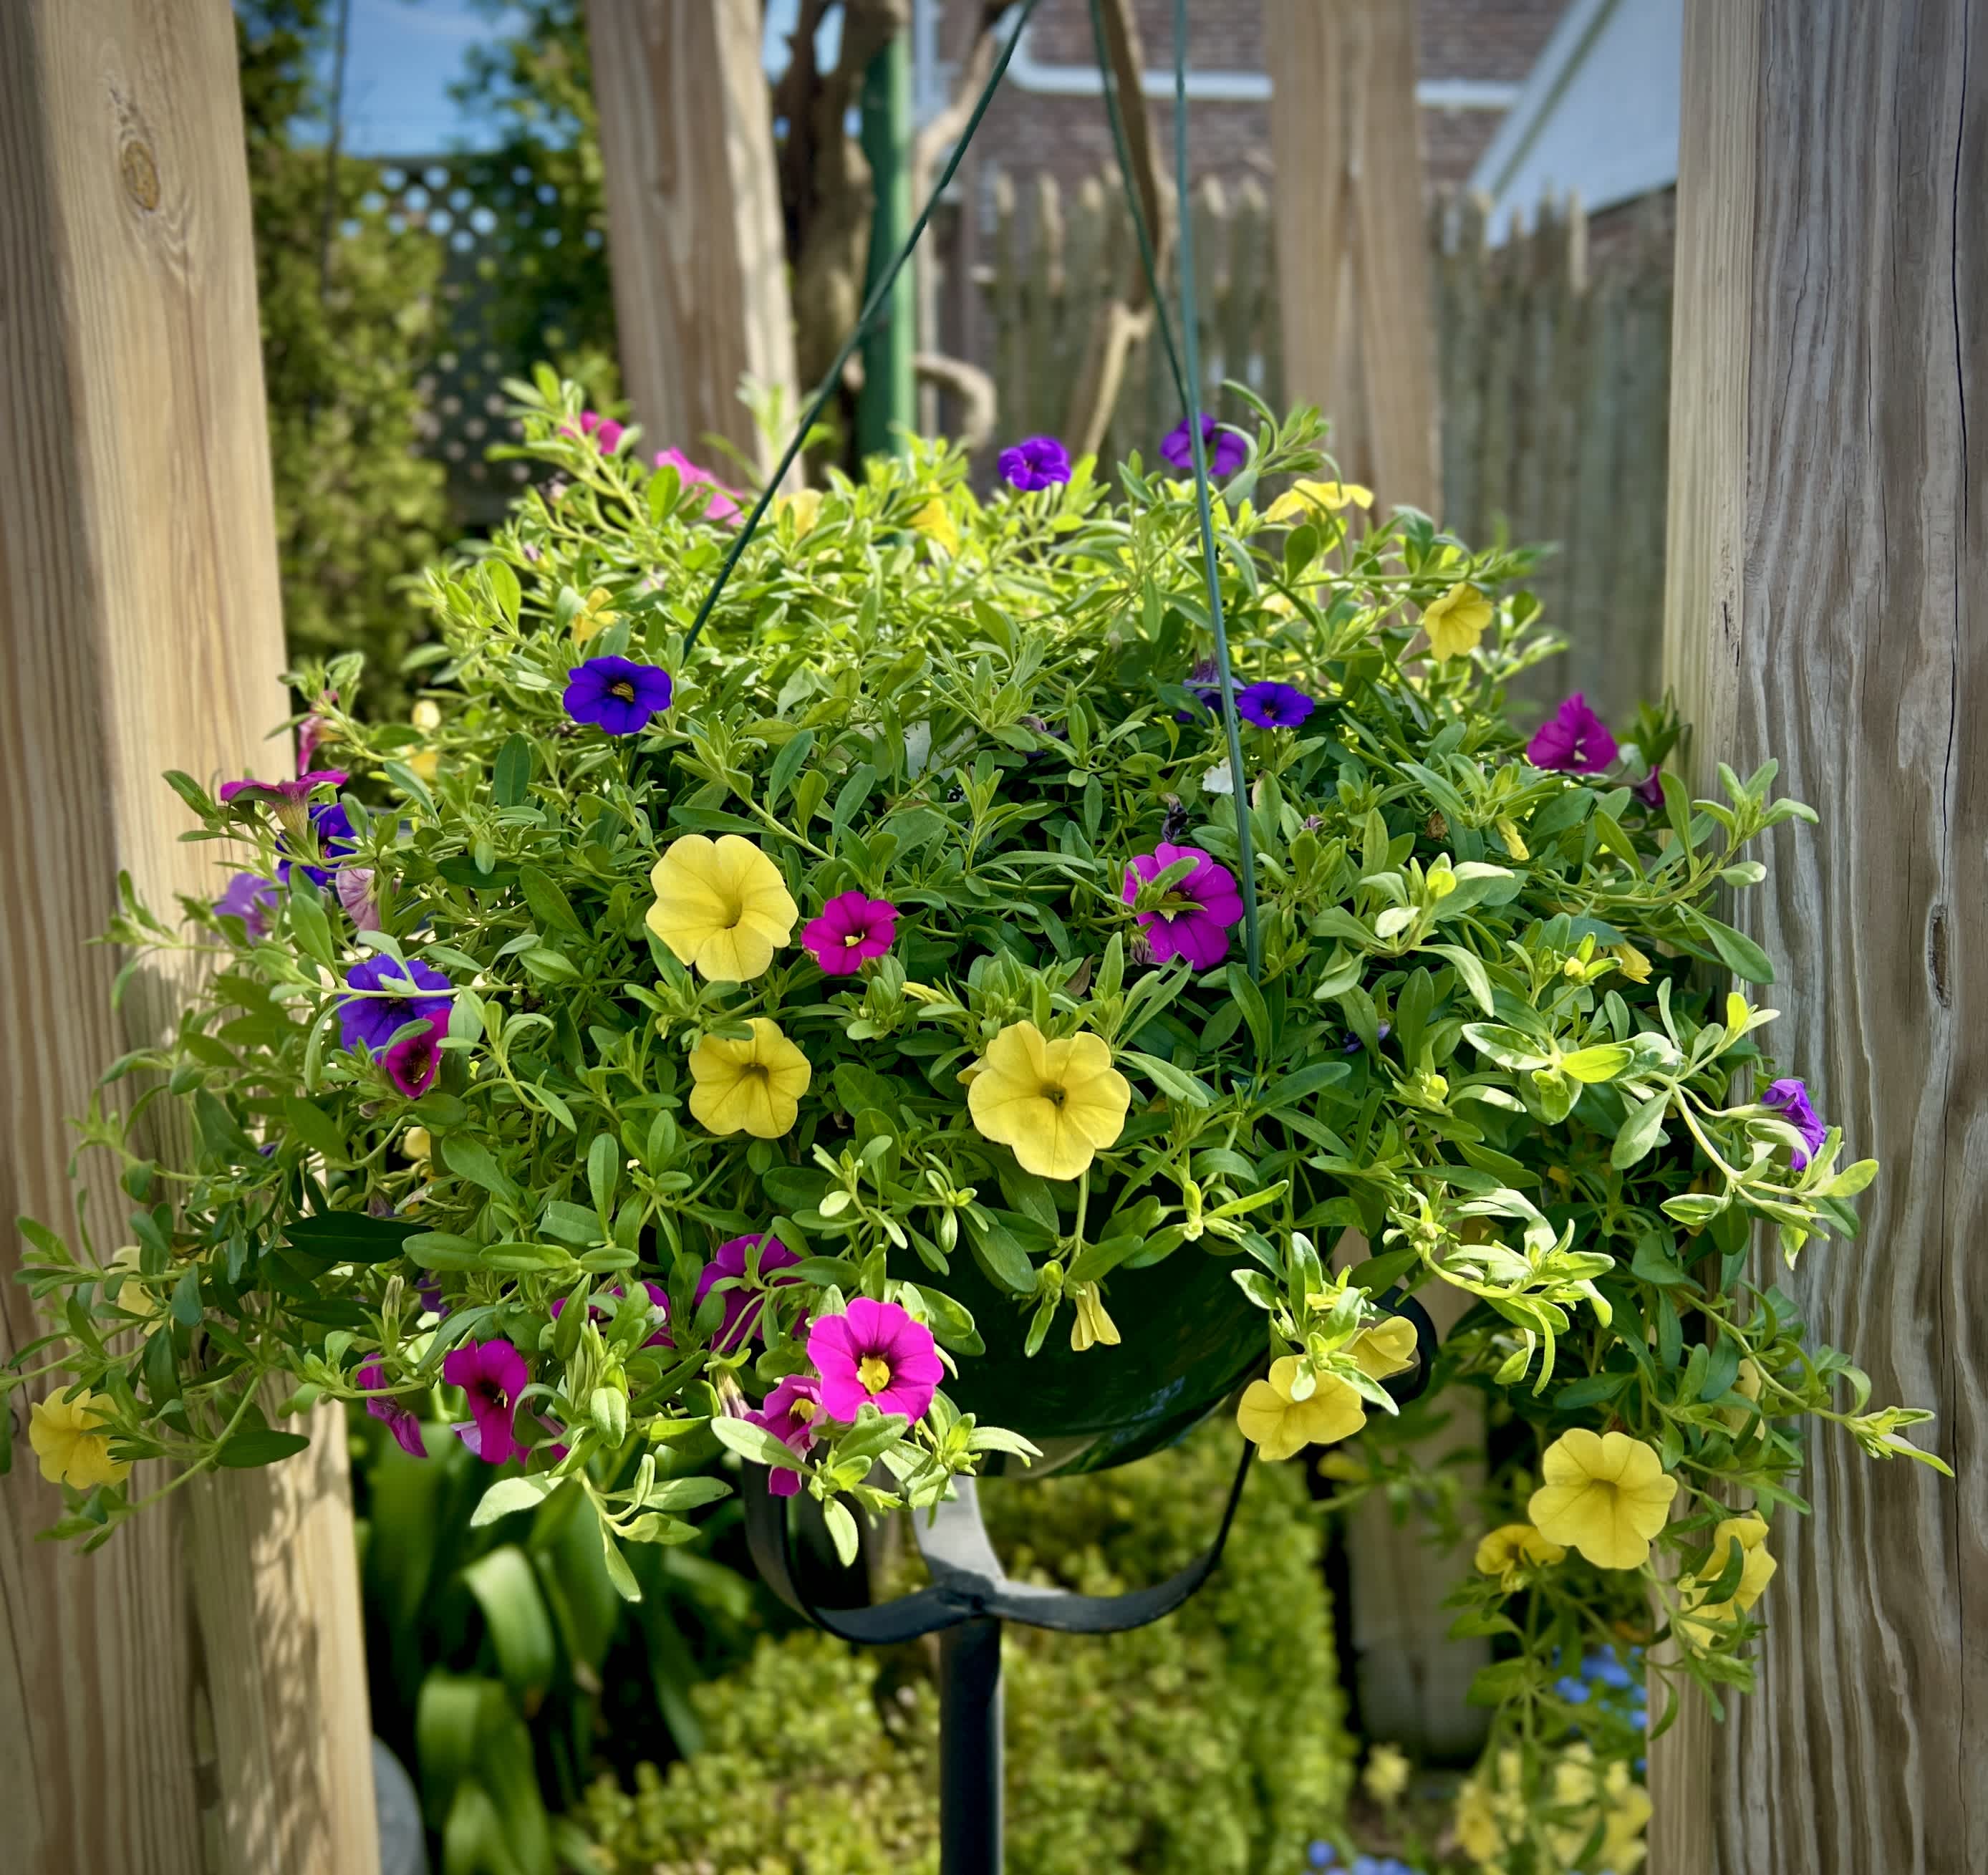 Pink, Yellow, and Purple Million Bells Outdoor Hanging basket (Only 1 available) - Pink, yellow, and purple  Million Bells make up this colorful outdoor hanging basket. As this basket grows, the beautiful flowers will rail down and create a spectacular show. Best blooms in FULL SUN. Quantities very limited.